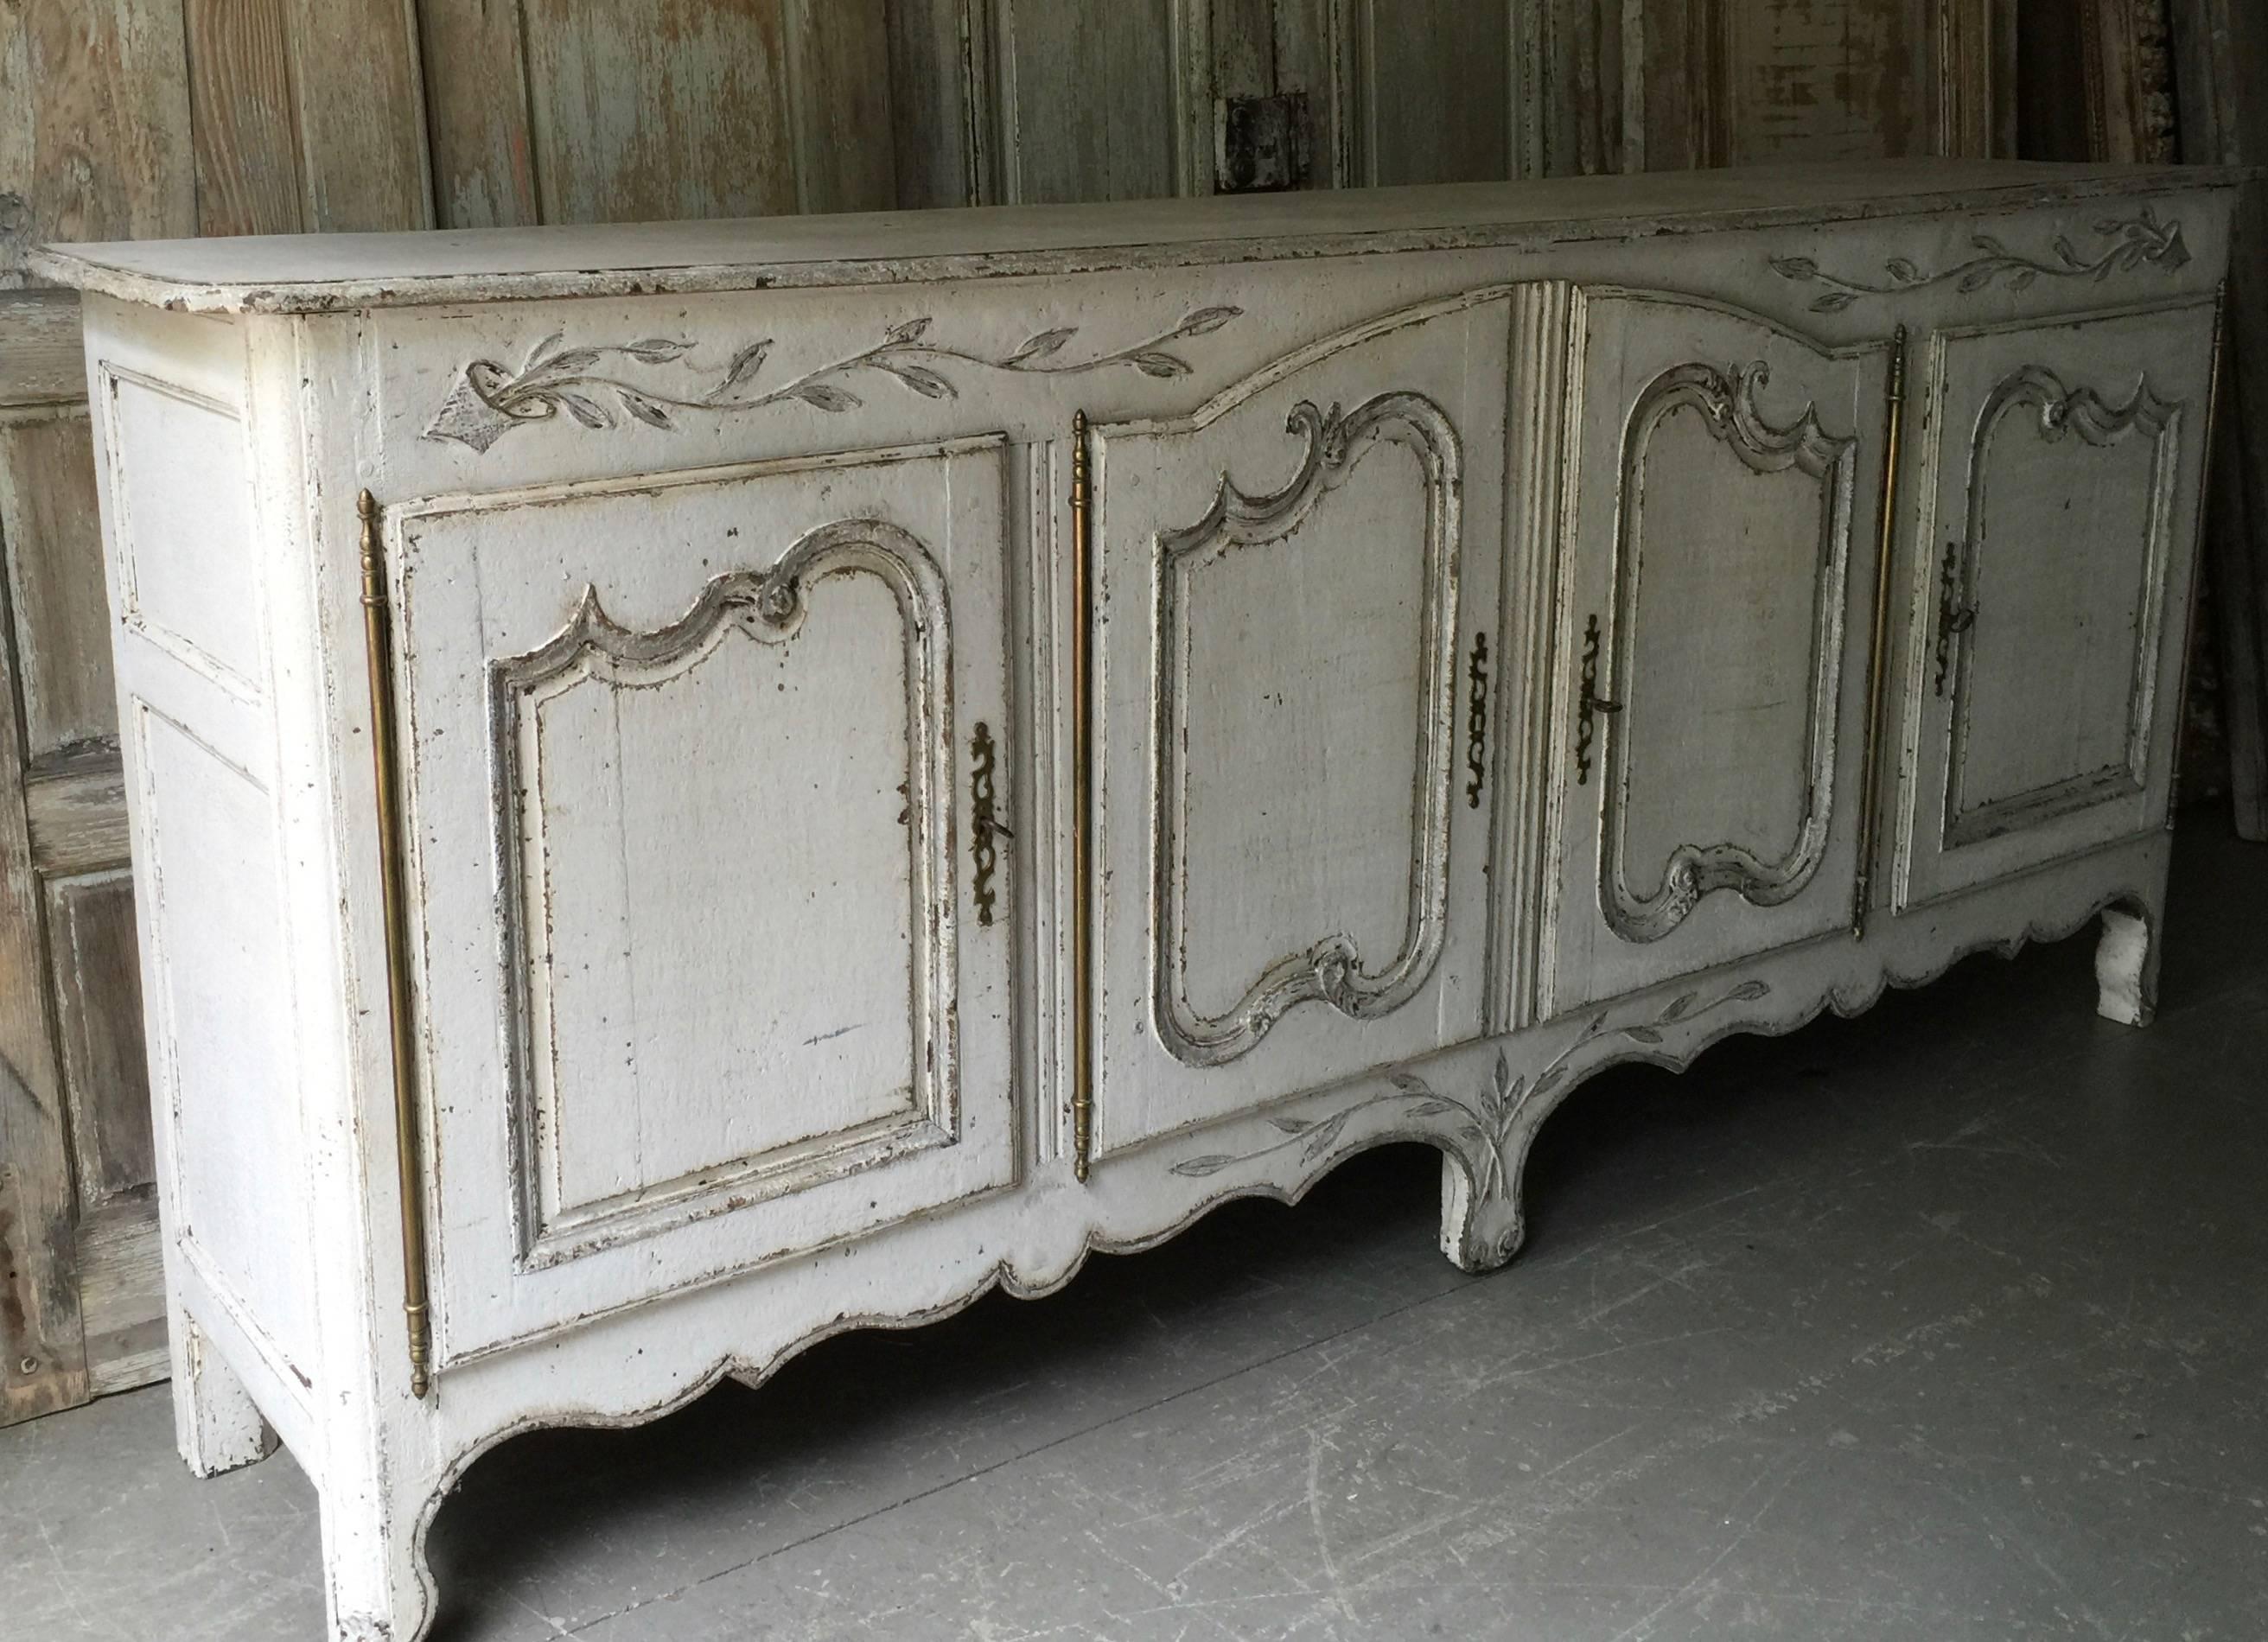 Handsome 19th century pained Enfilade in Louis XV style with four raised panel doors in richly carved lovely floral designs, France, circa 1850.

Here are few examples surprising pieces and objects, authentic, decorative and rare items that you